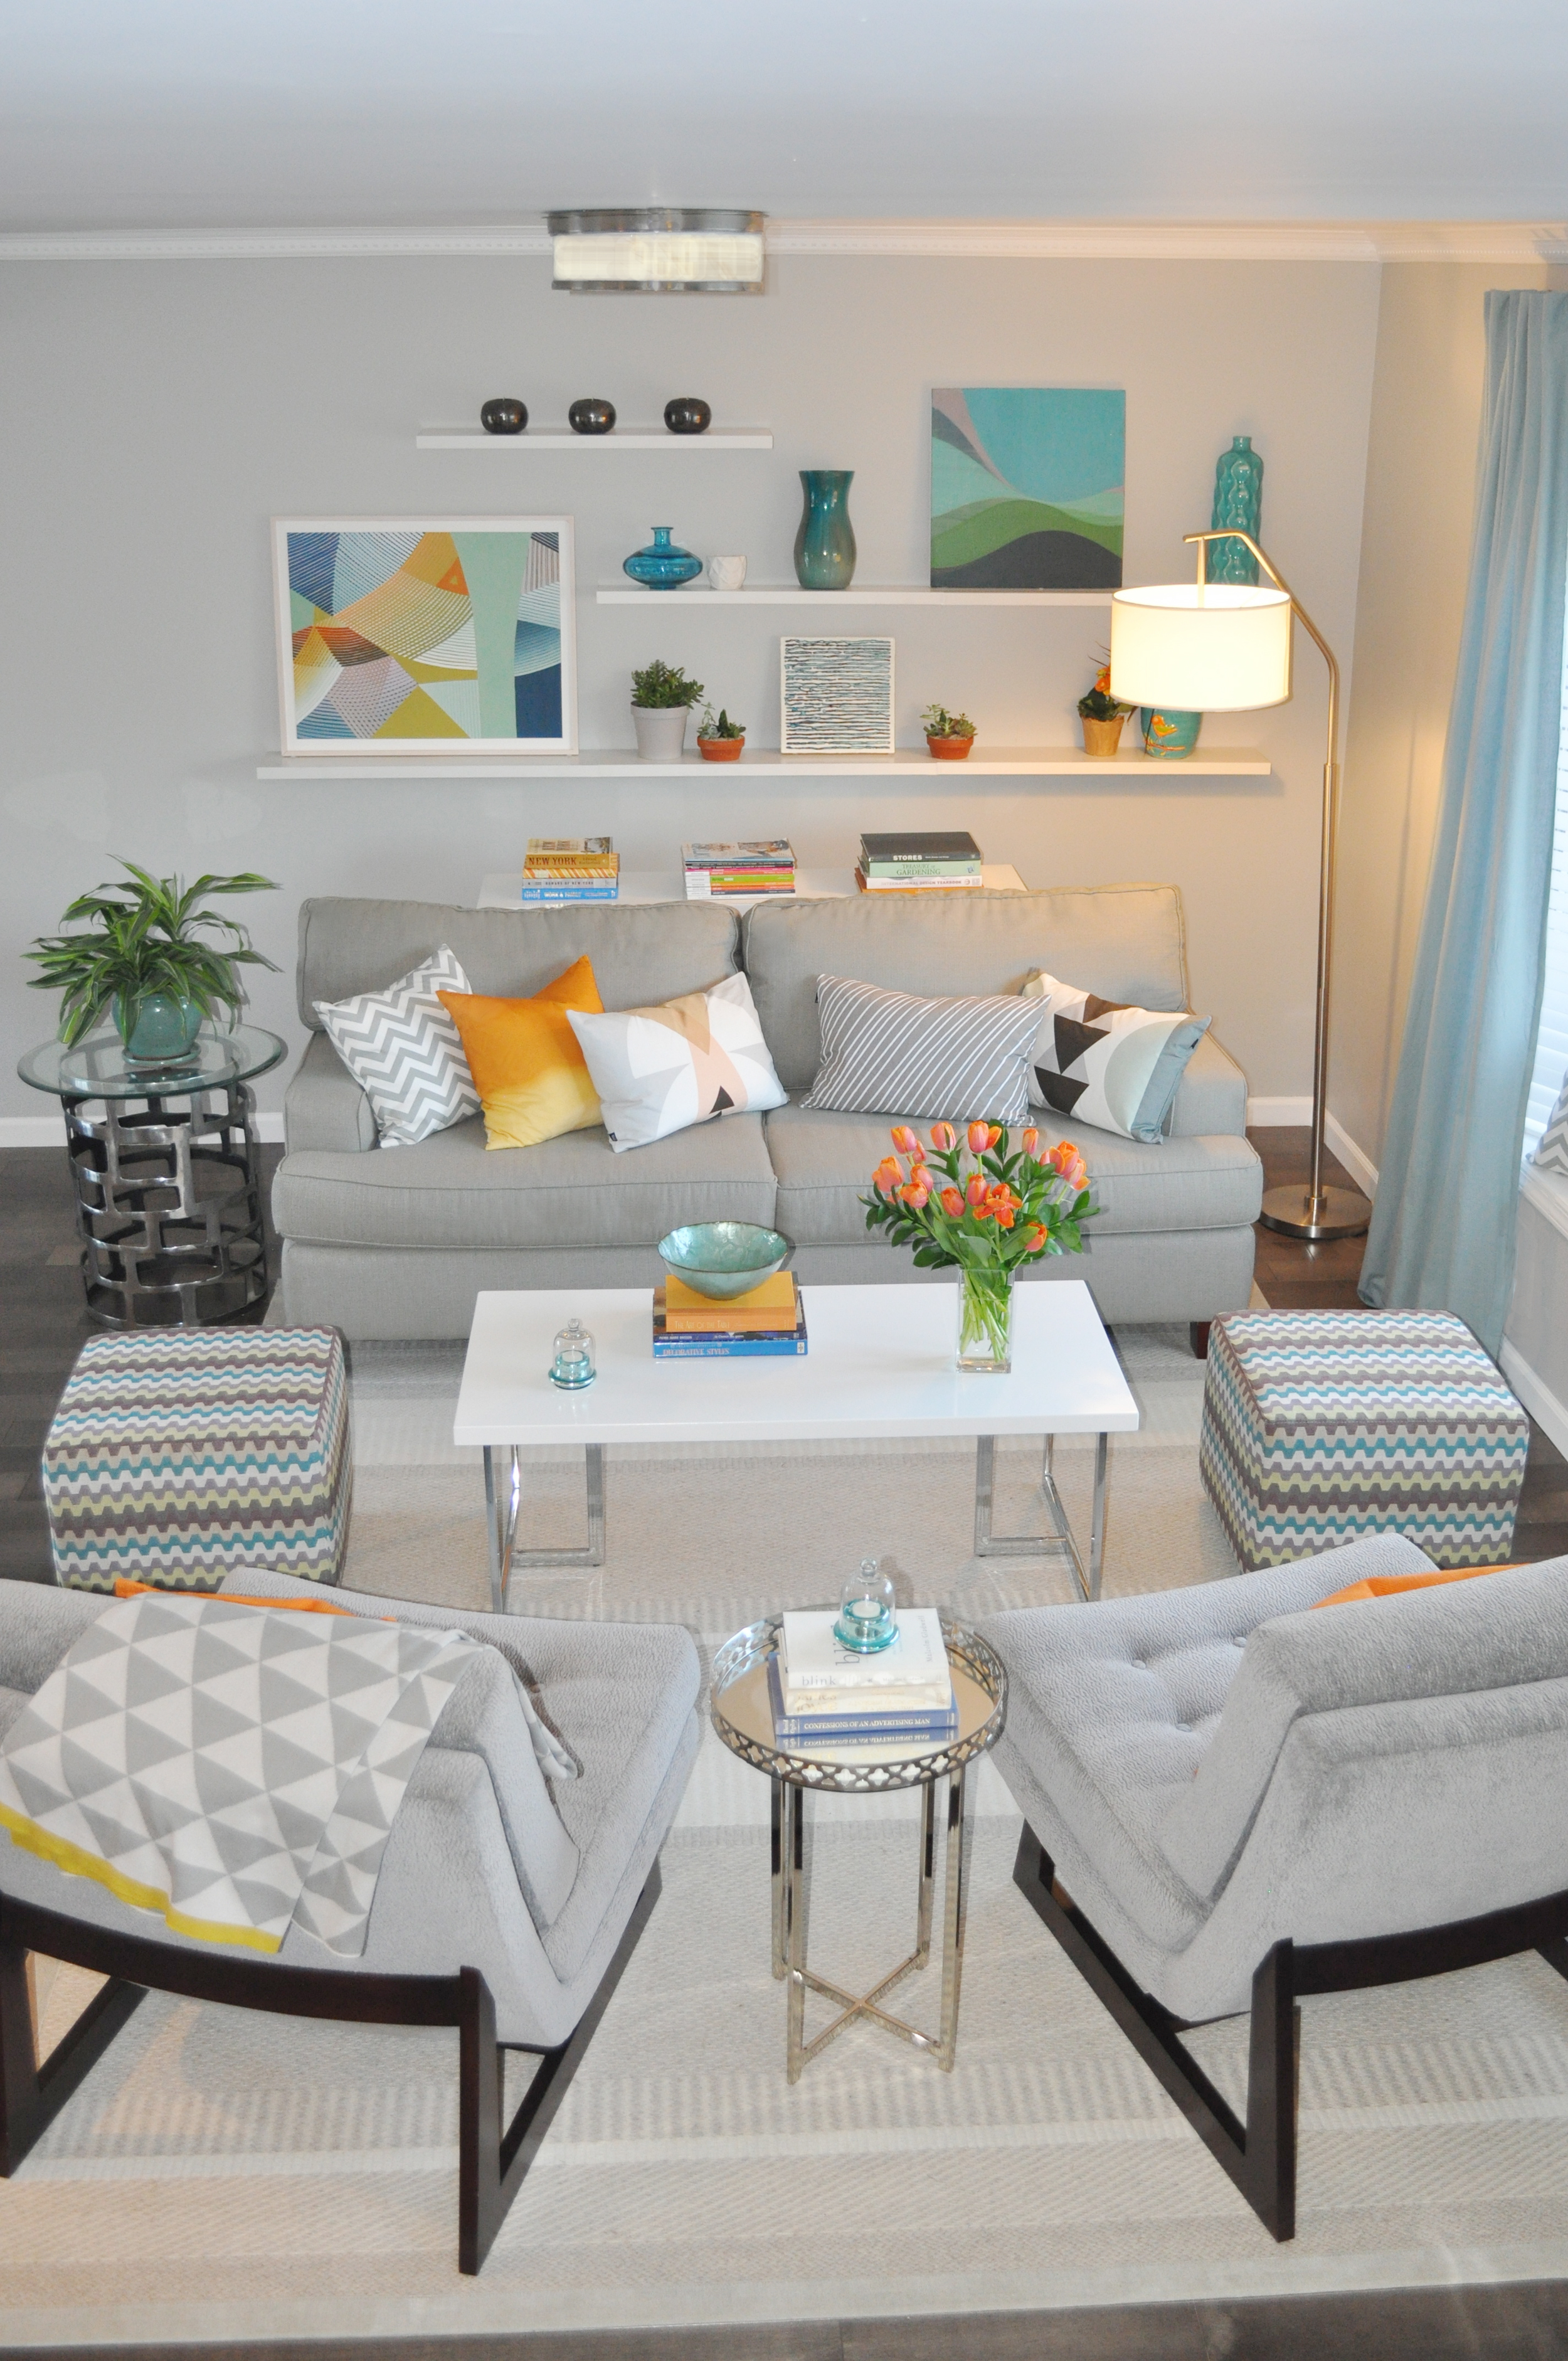 Kim Mitchell Production Designer_HGTV_Buying and Selling with The Property Brothers_Season 3 _Episode 316_Living Room Design_Pop of Color with Gray_Art by Kenise Barnes Gallery_Kontrast_Evas Decorating Chairs_Scandecor Rug_Churchill__Hudson Valley.jpg